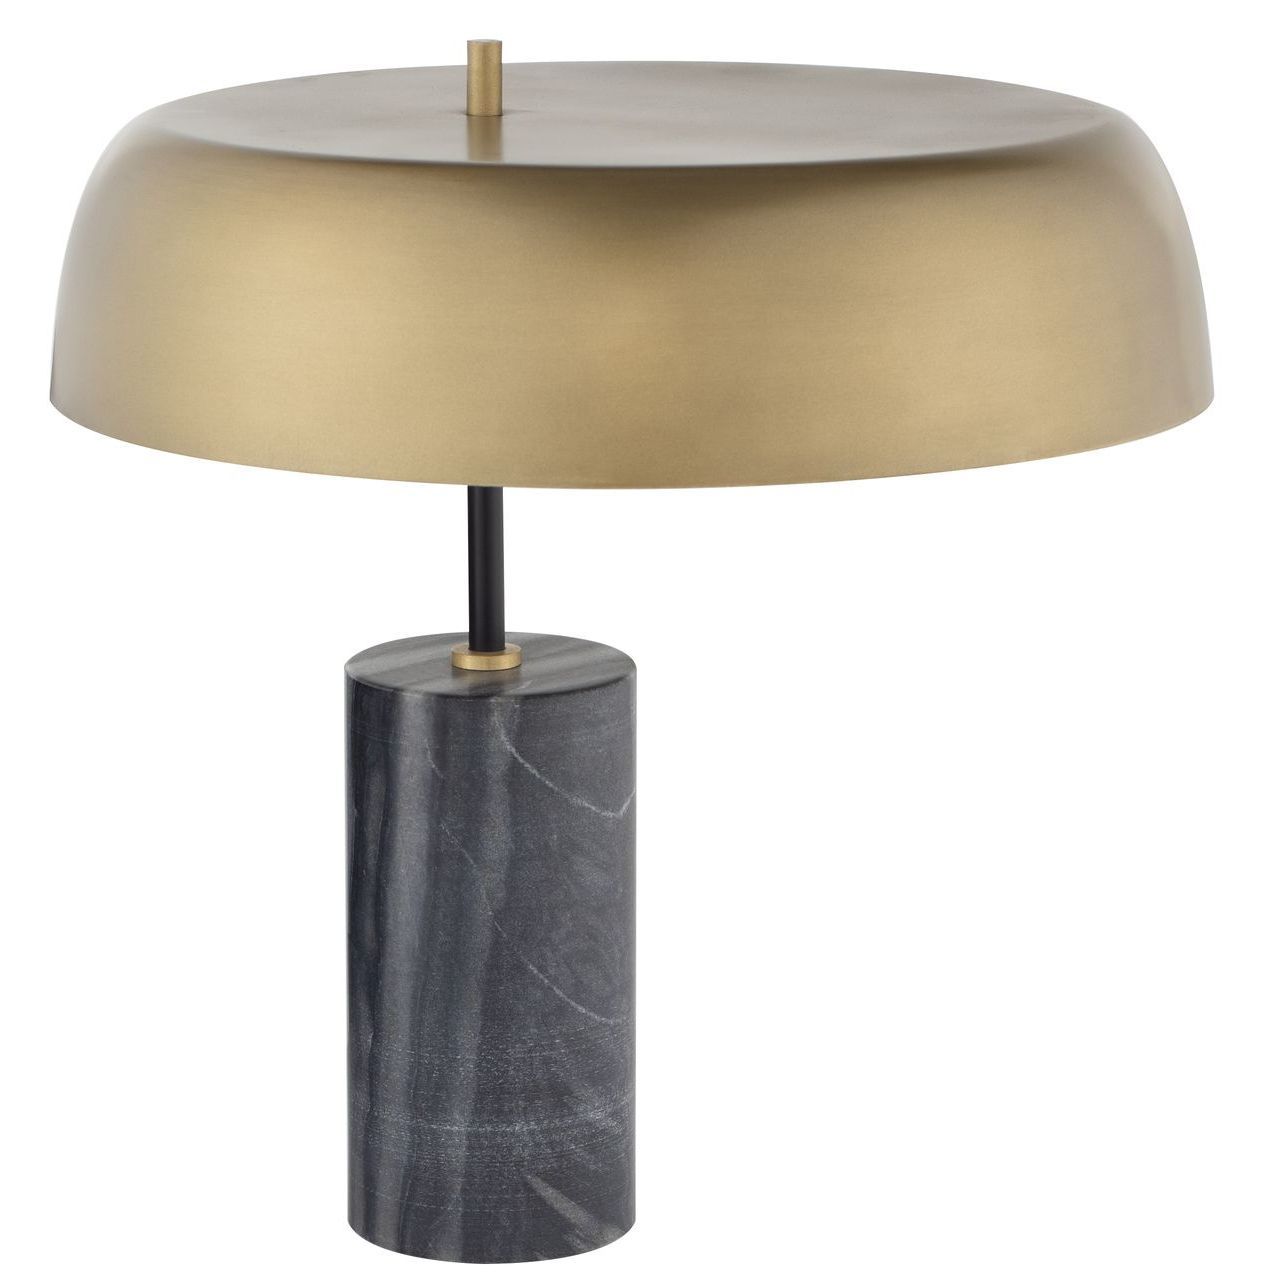 MADDOX TABLE LIGHT - BRASS - Home Office Makeover